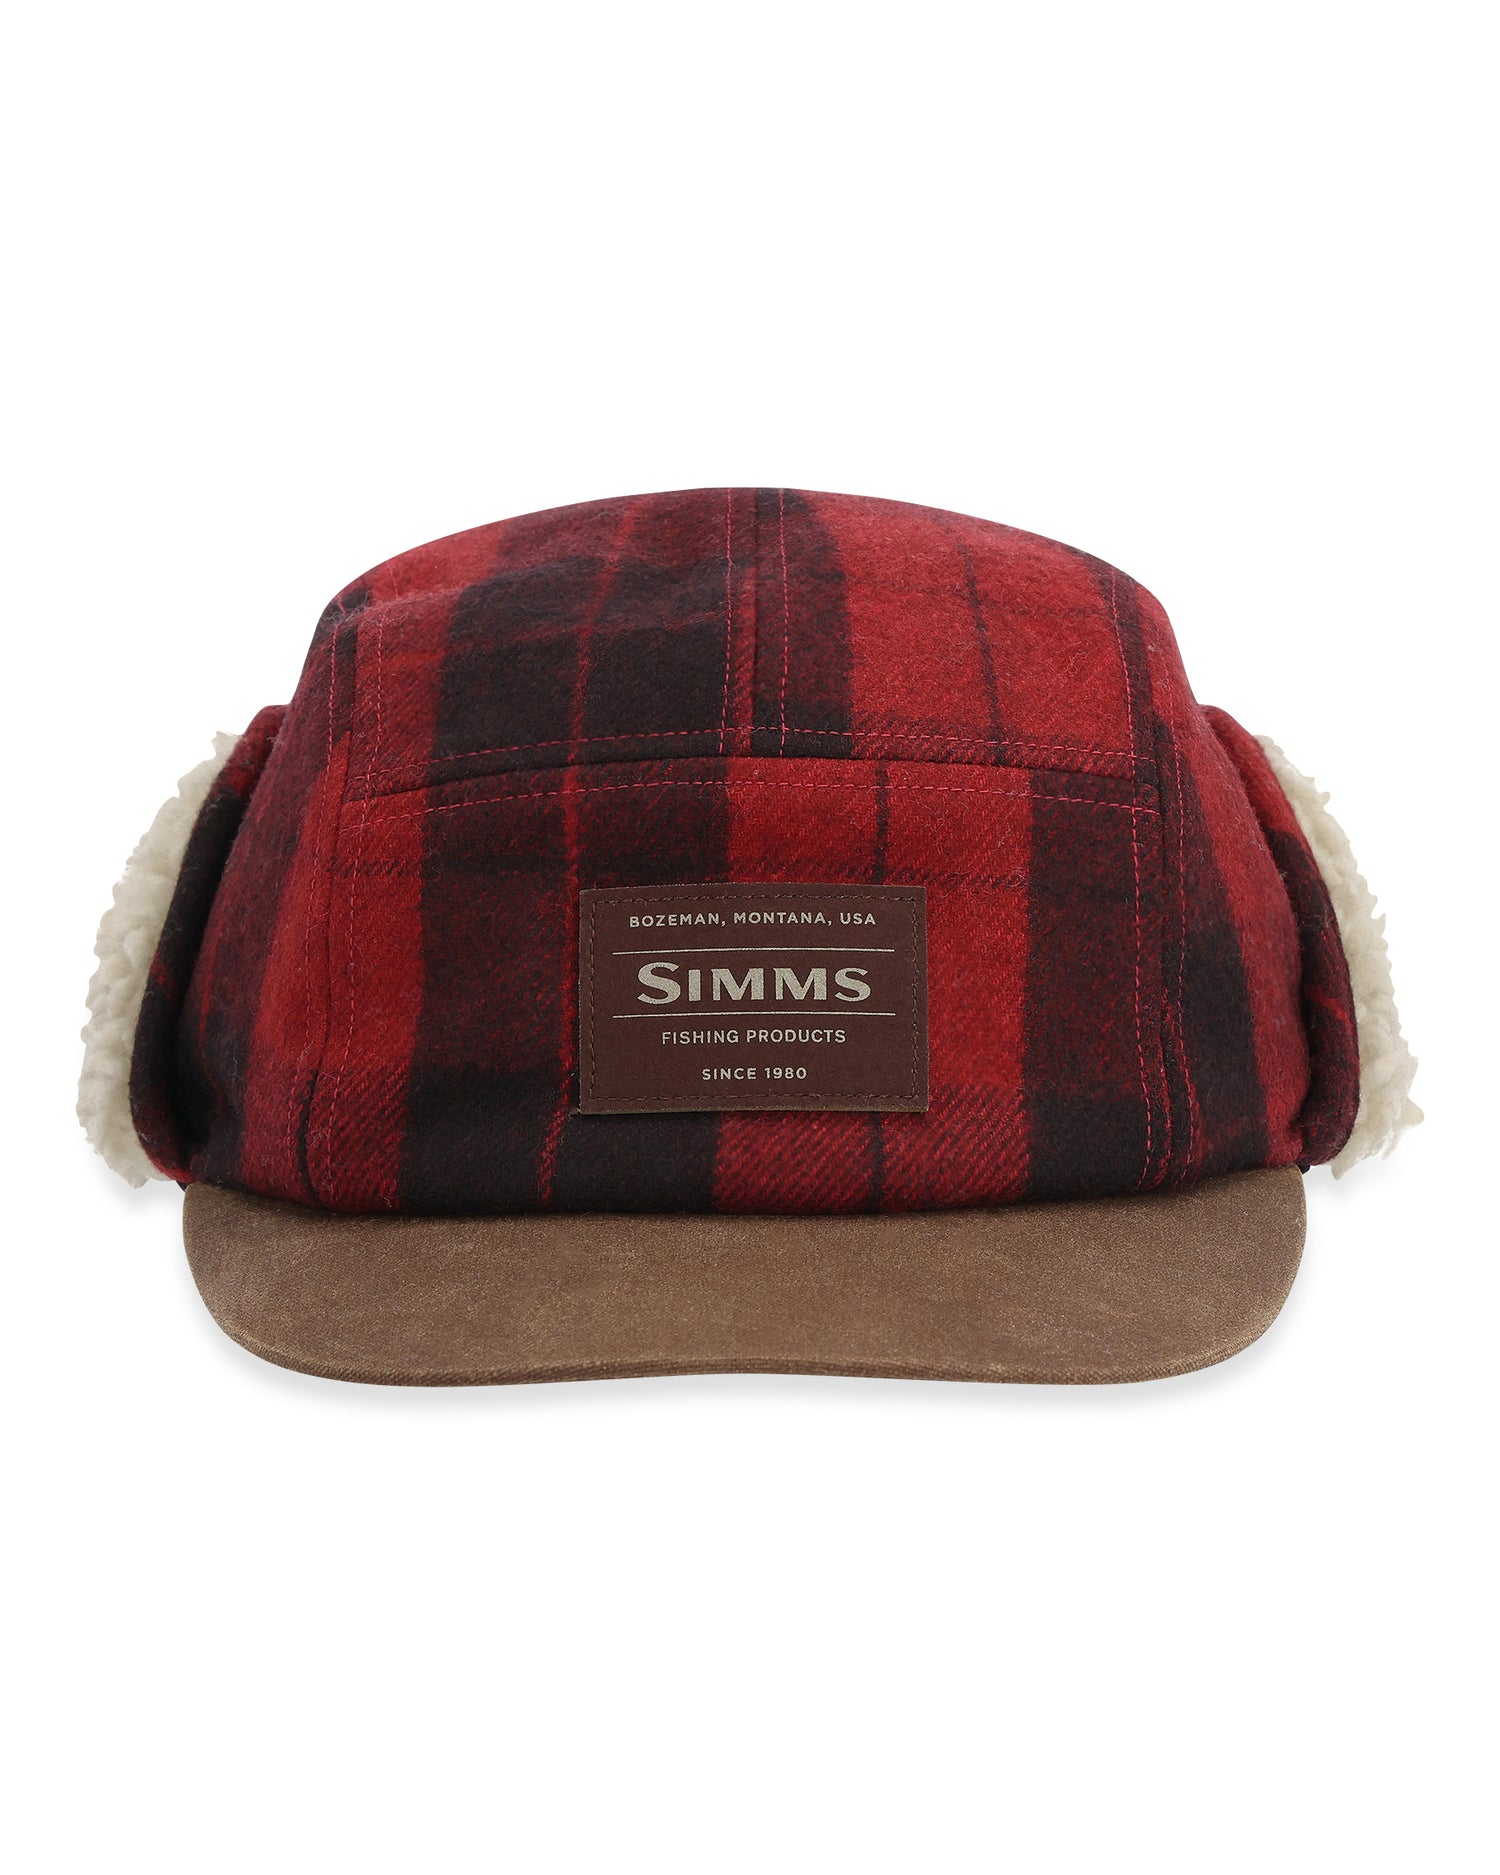 Coldweather Cap  Simms Fishing Products